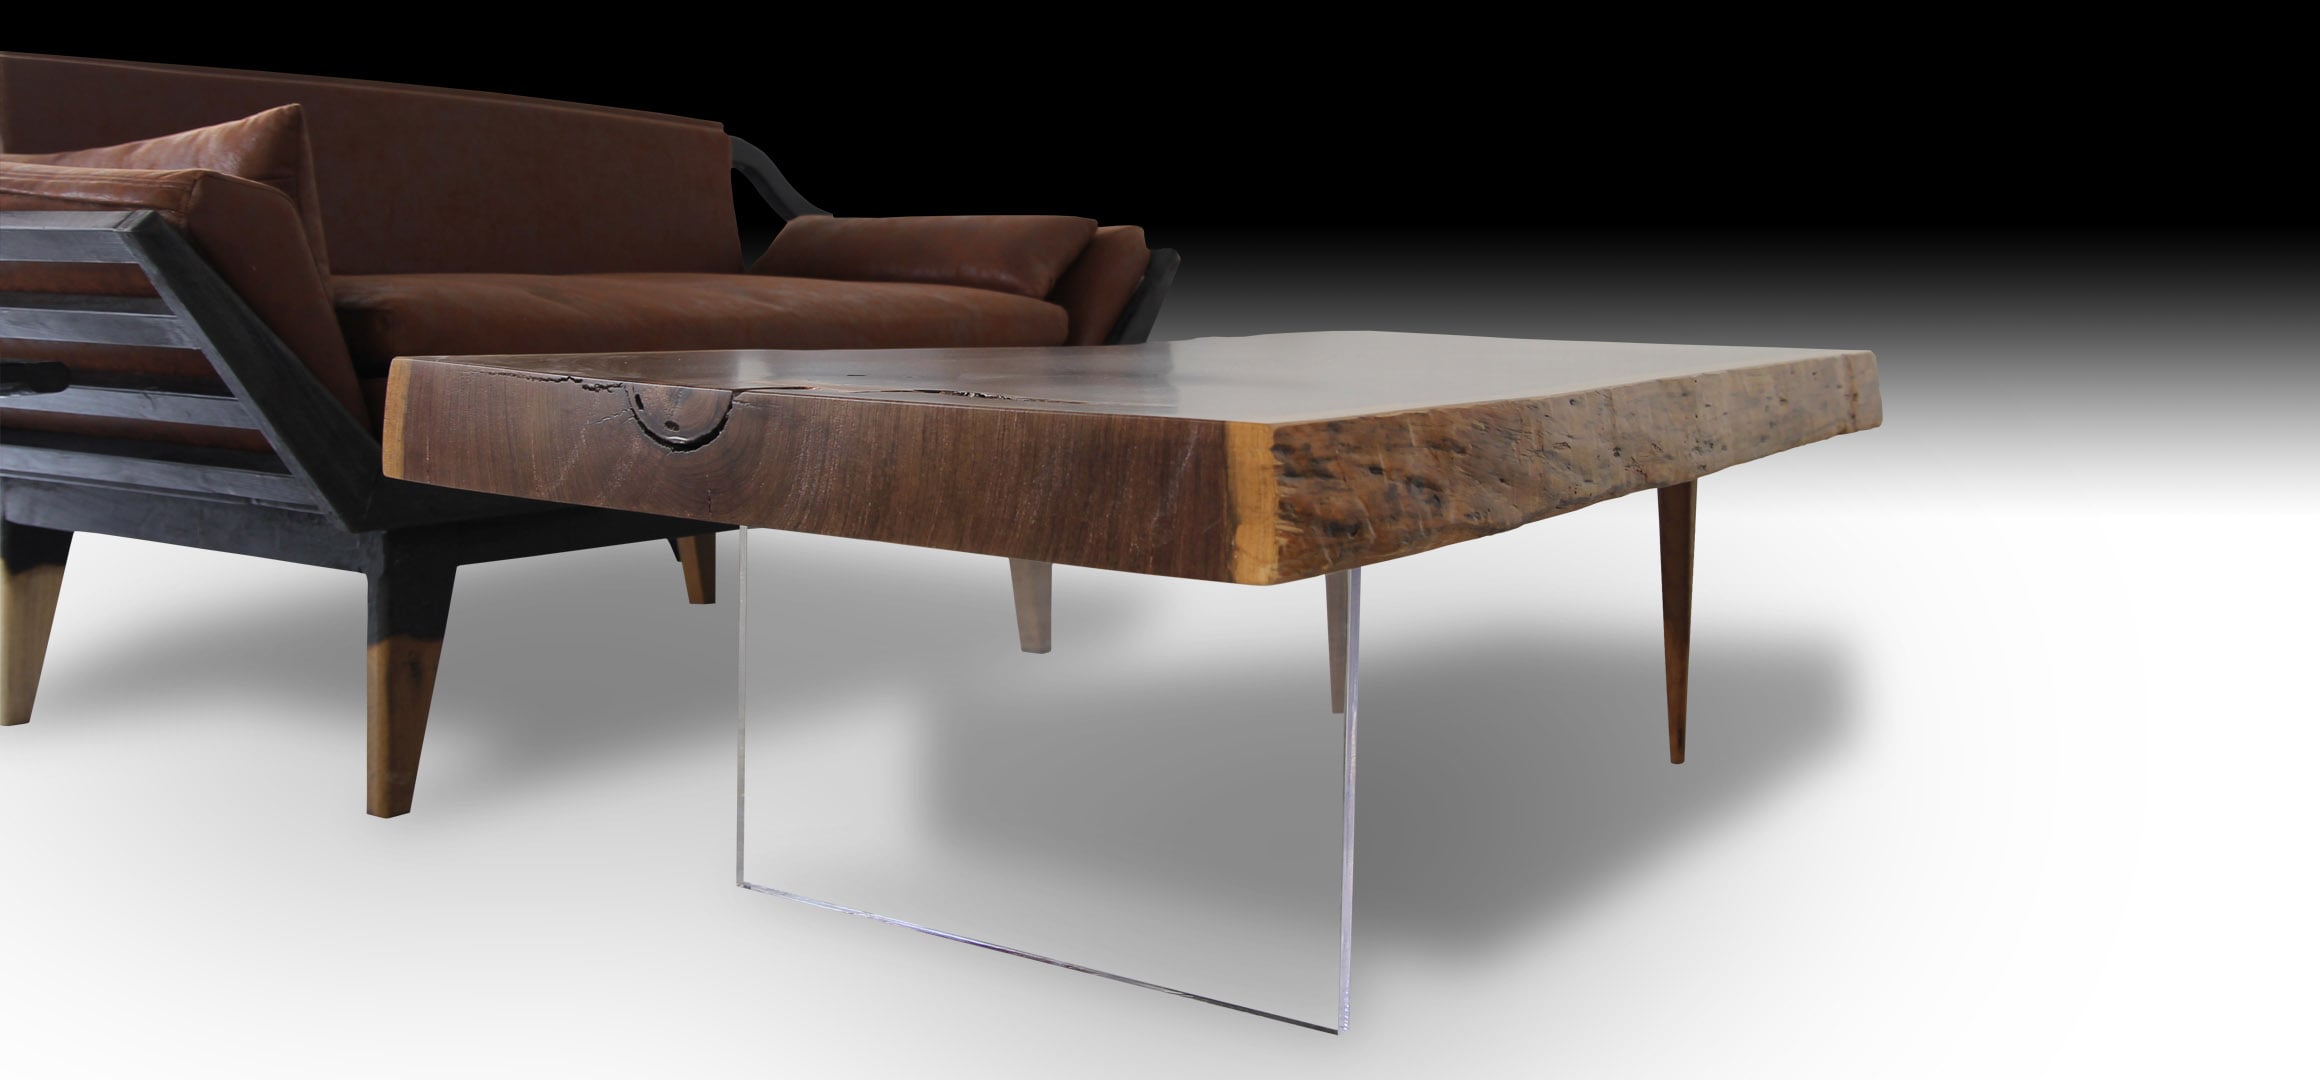 Animal live edge walnut wood coffee table next to a wooden sofa